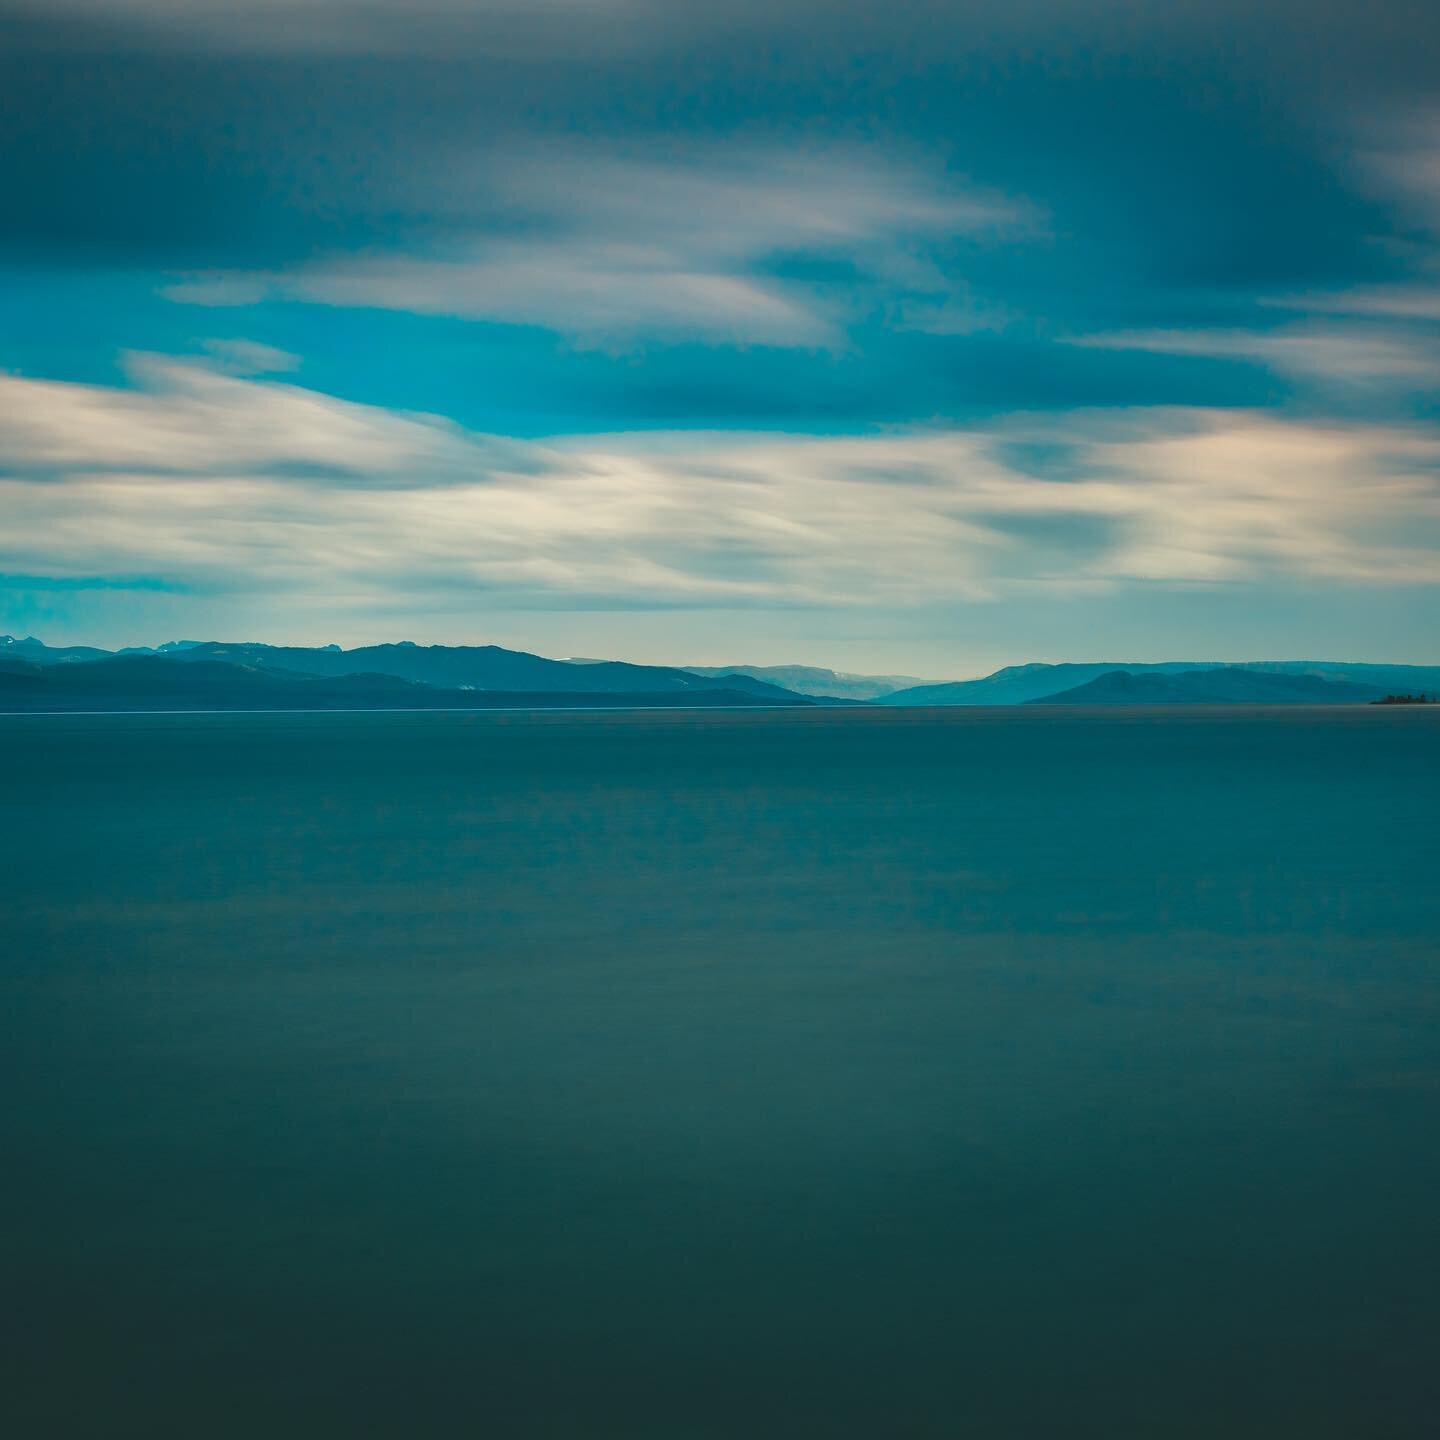 Passing time at the Yellowstone Lake&hellip; #yellowstonenationalpark #yellowstonelake #yelllwstone #wyoming #landscapephotography #photography #travel #beauty #nature #mountains #leefilters